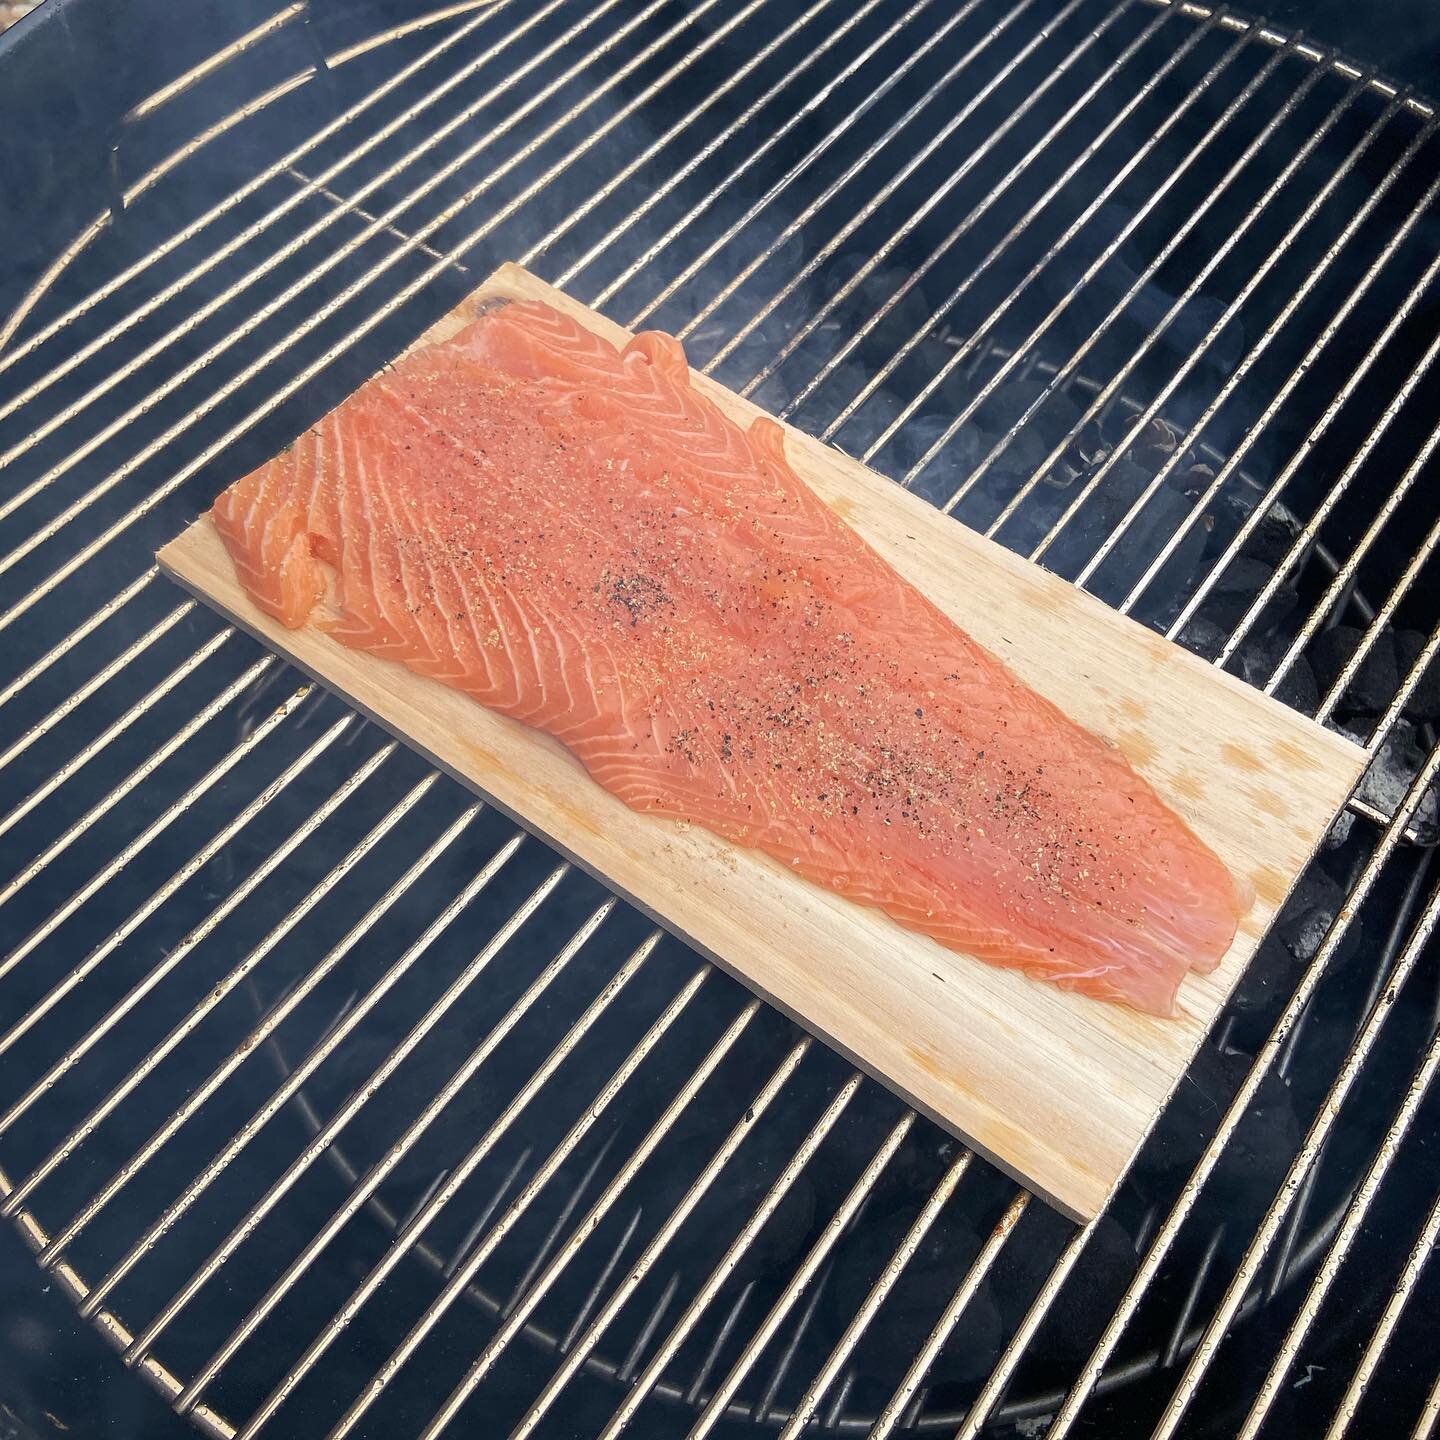 The new blog post is up! While not necessarily a recipe, the steps to make warm smoked salmon at home. Please check www.Niinaskitchen.com for details. #salmon #fish #smokedsalmon #smokedfish #charcoalgrill #cooking #homecooking #homecook #yummy @webe